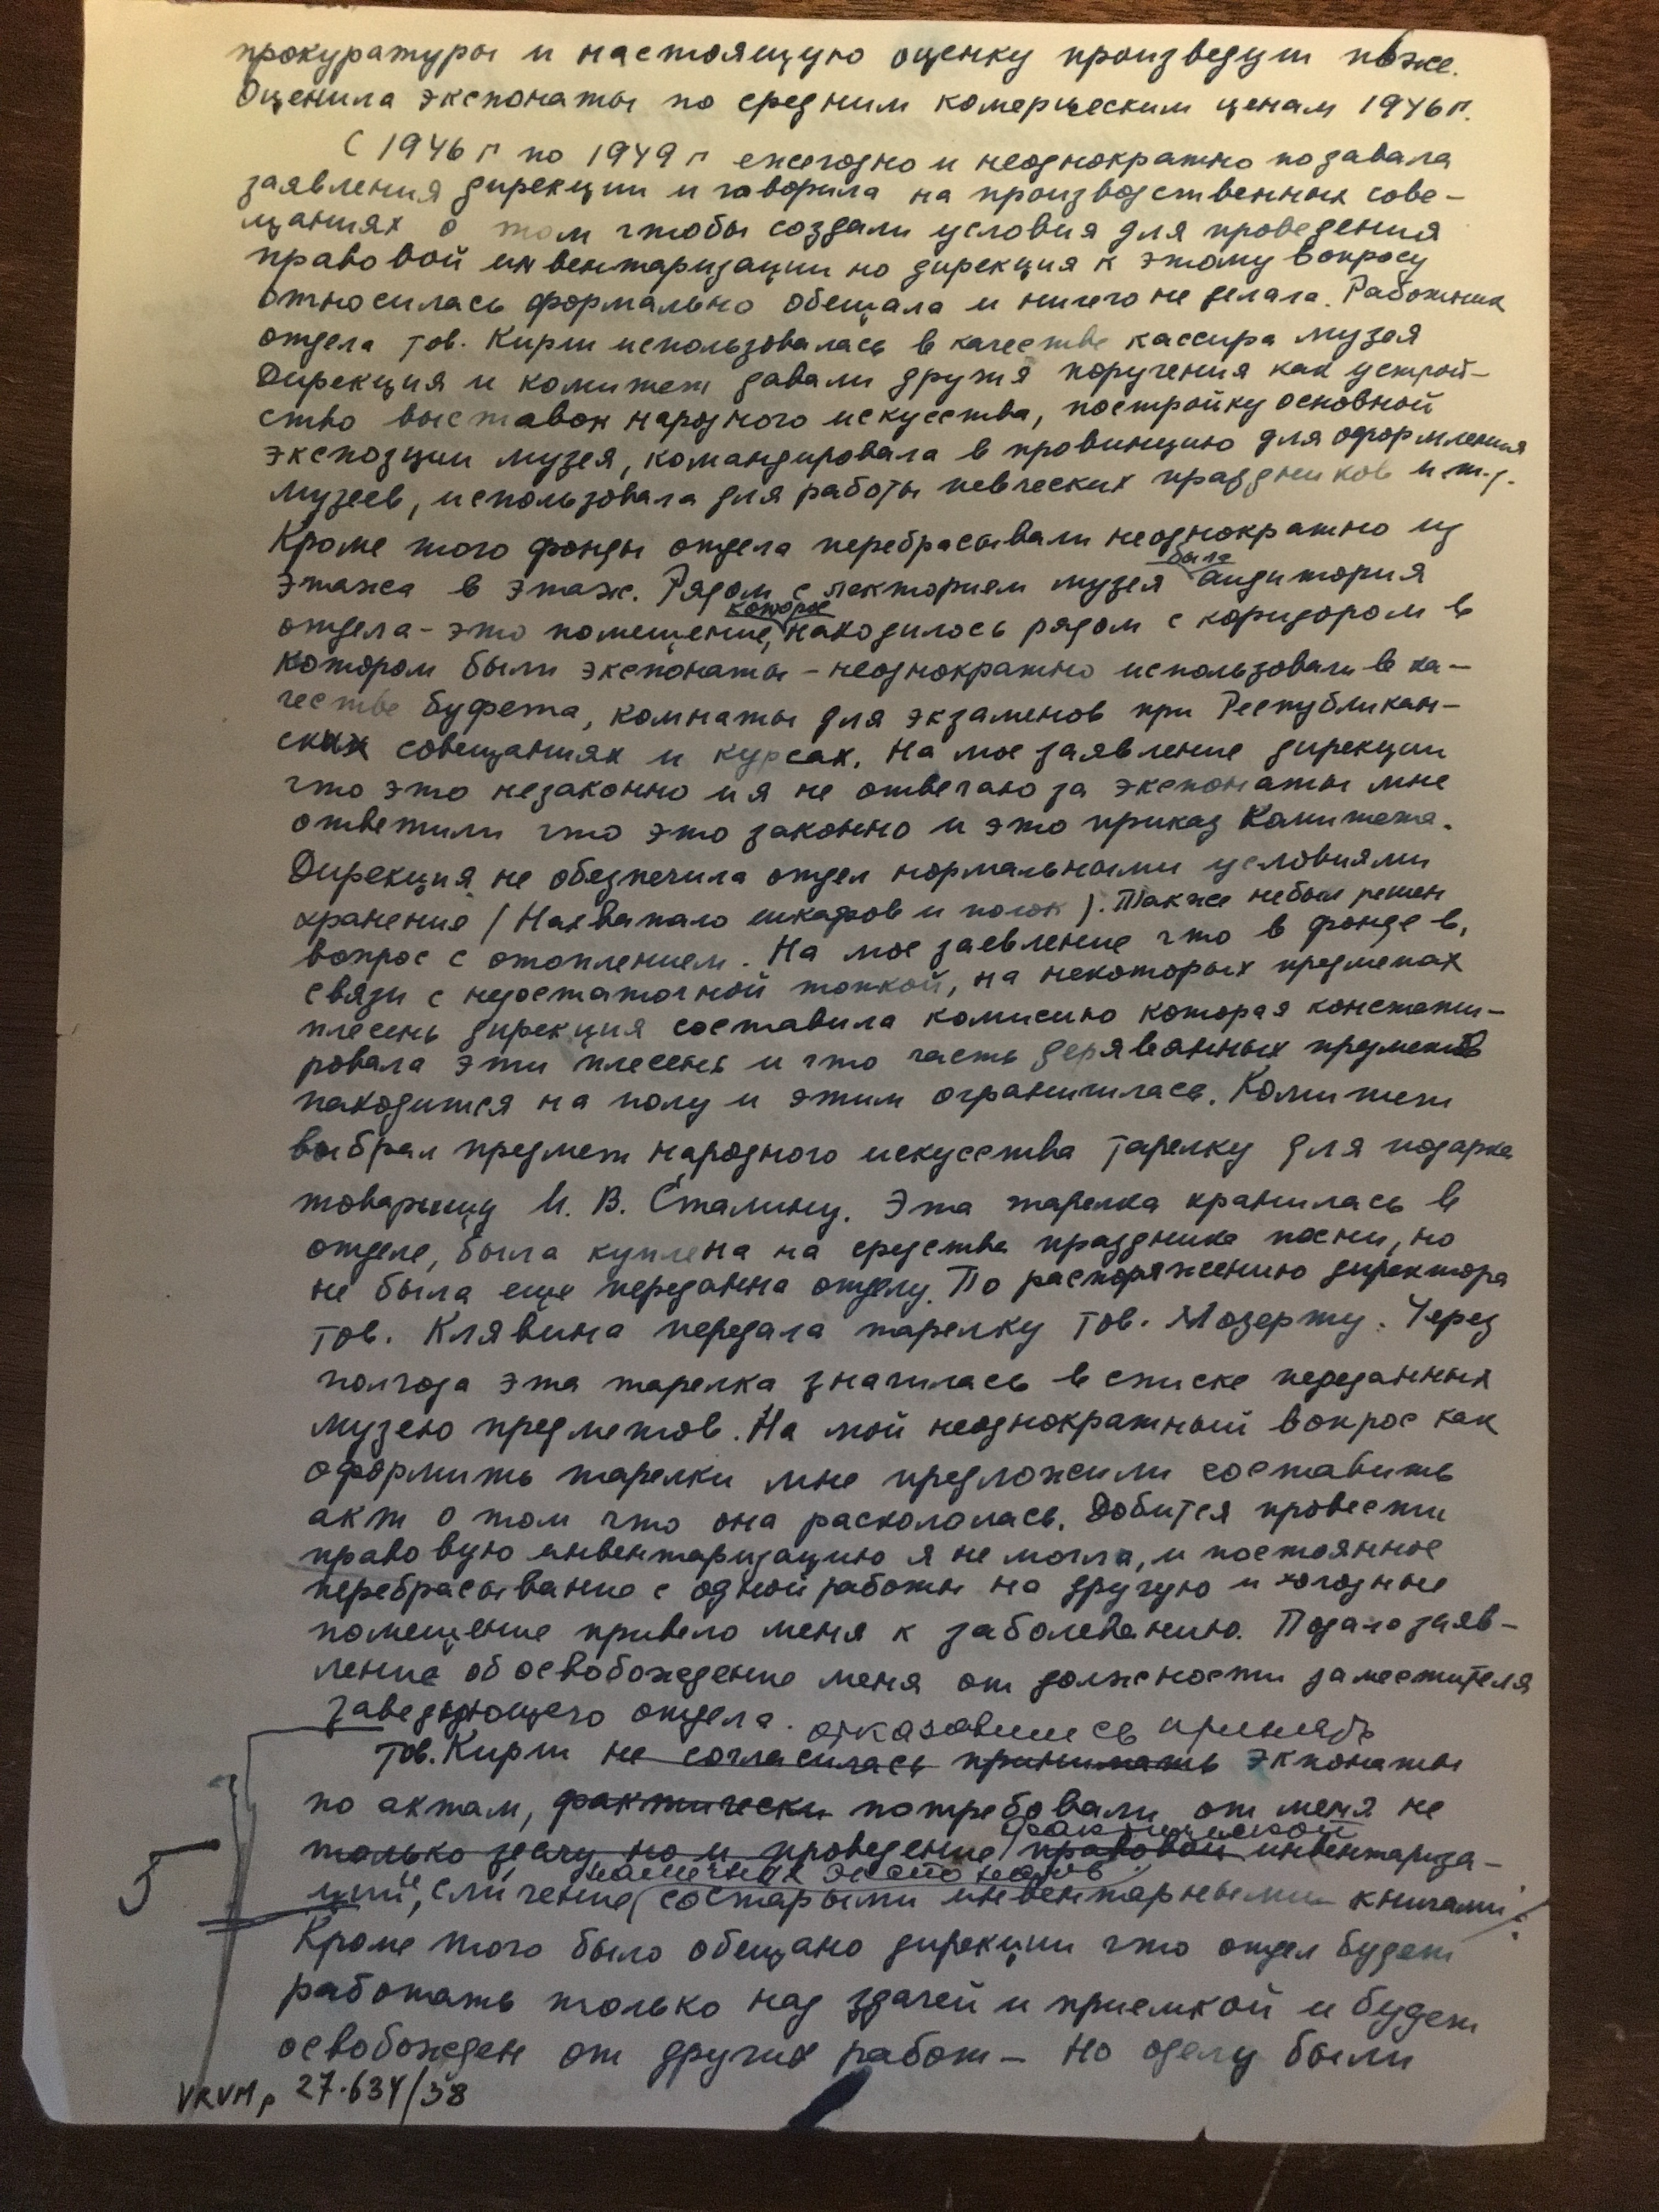 An excerpt from a draft explanation written by Mērija Grīnberga at beginning of 1950 to the LSSR State Control Ministry about why collections of the Ethnography Department of the Historical Museum were not handed-over according to rules.